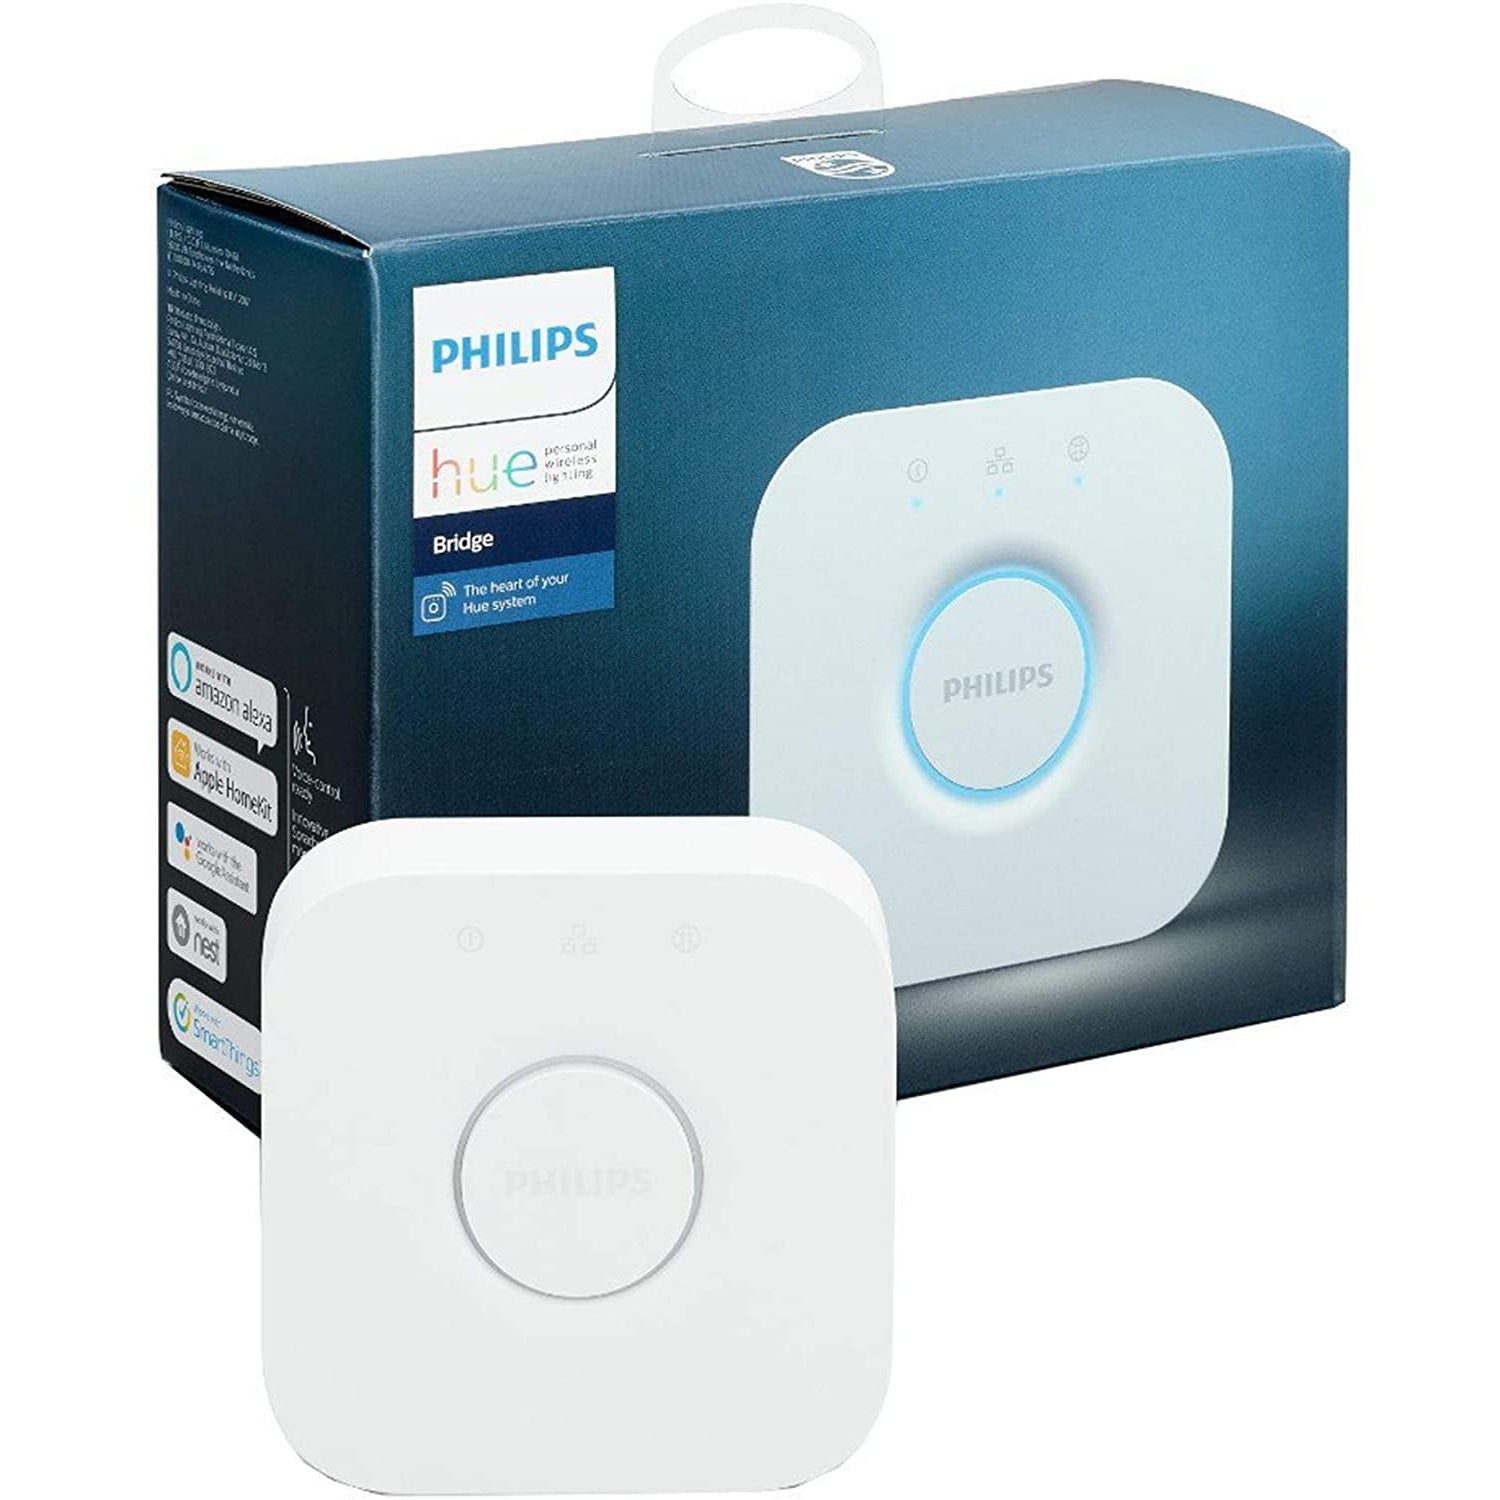 Philips Hue Bridge 2.0 (Works with Alexa), White. Smart Home Lighting System - Refurbished Excellent